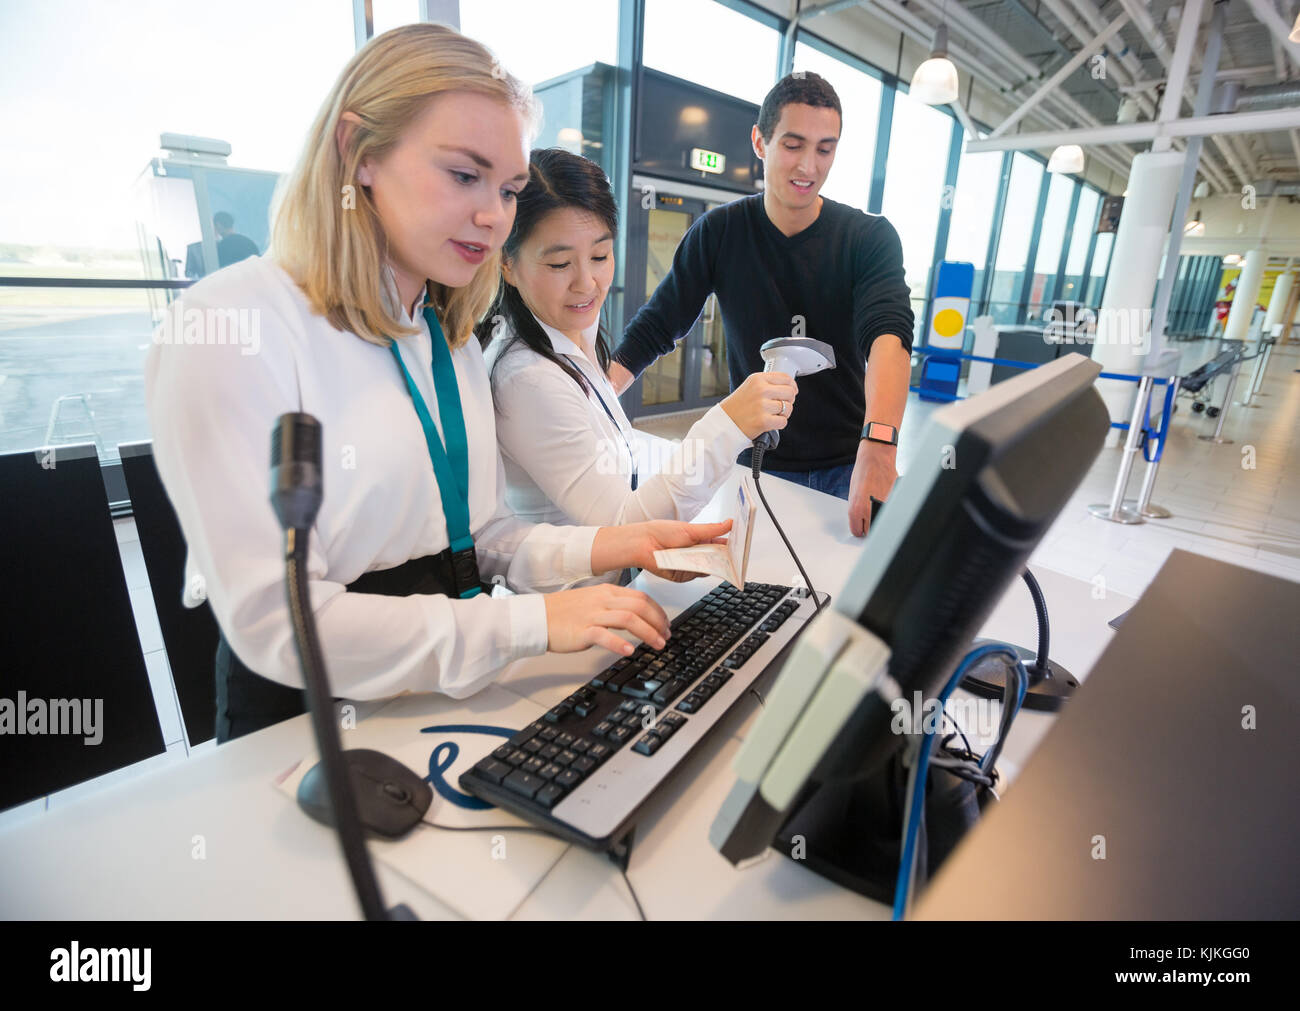 Young receptionist entering details of passport in computer while colleague scanning passengers smartwatch in airport Stock Photo